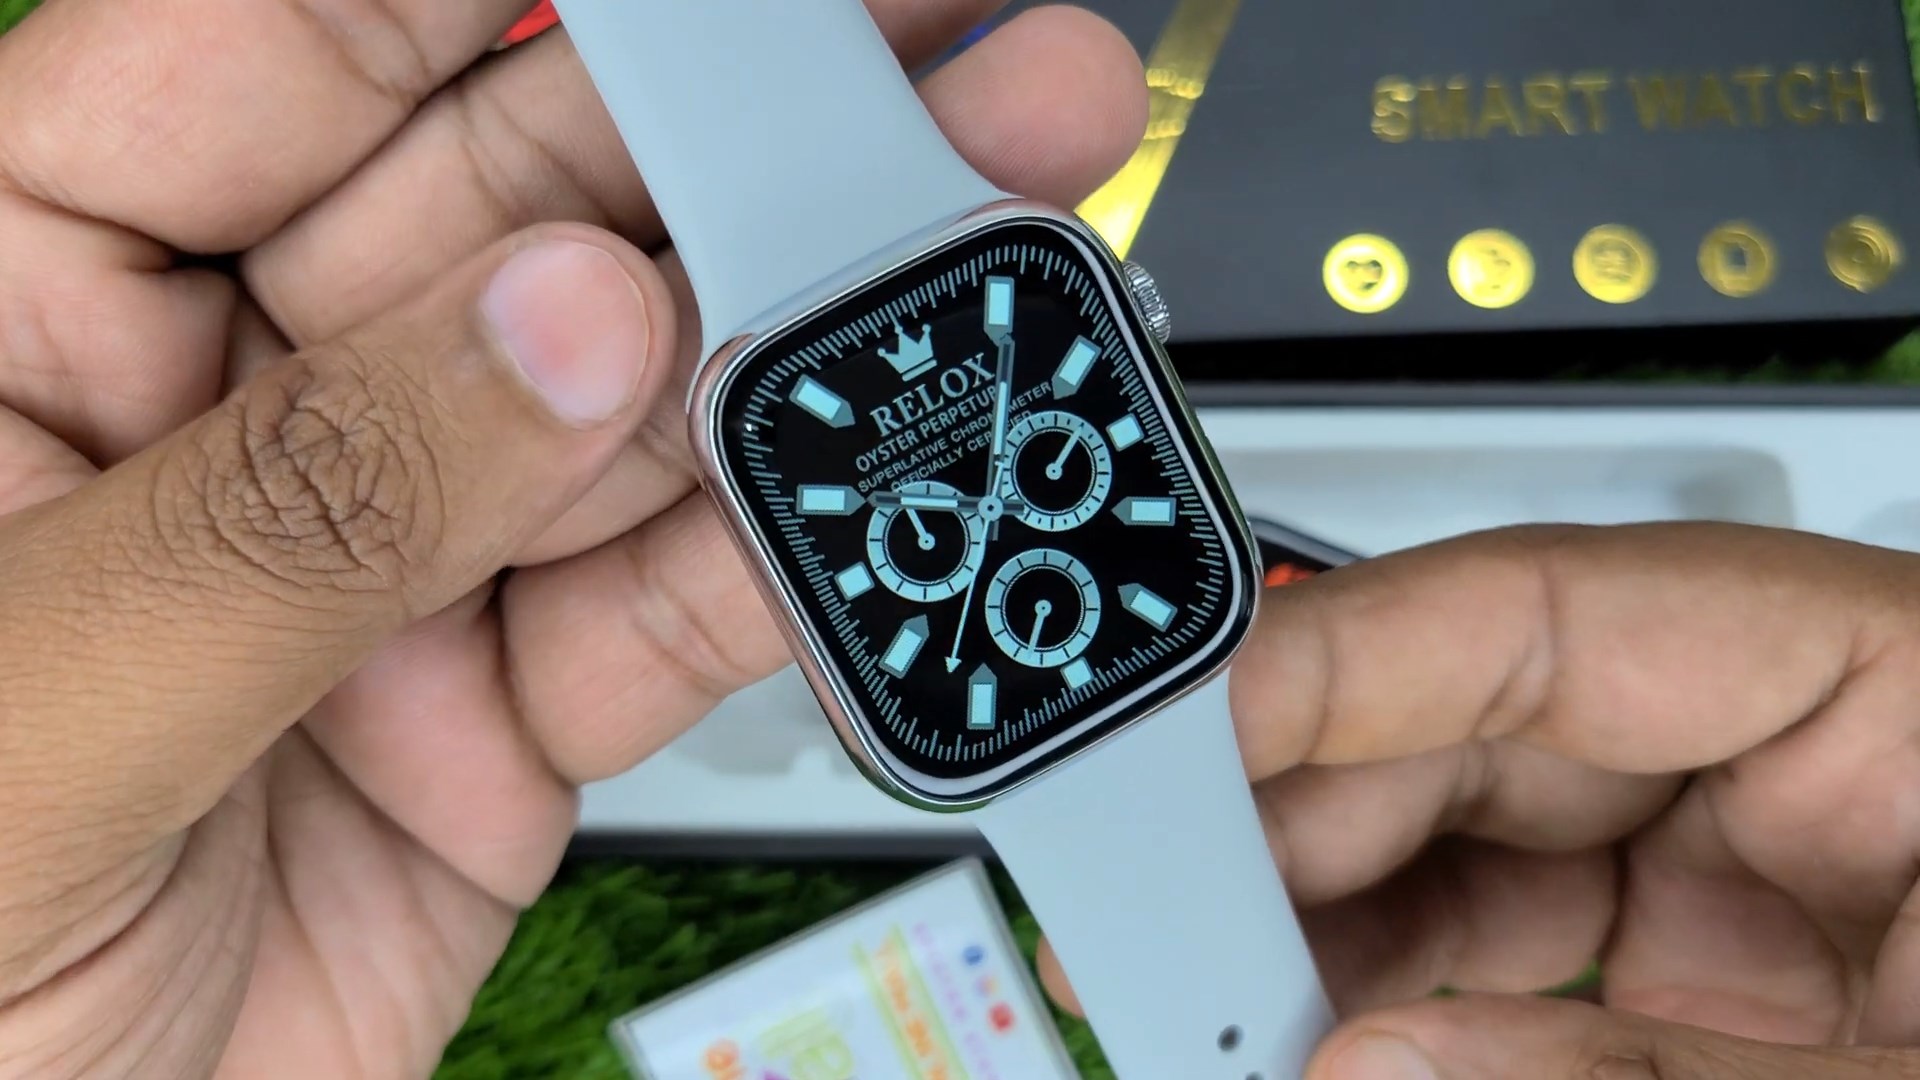 WS007 Review - New Apple Watch Series 7 Clone With 2.0 inch Display